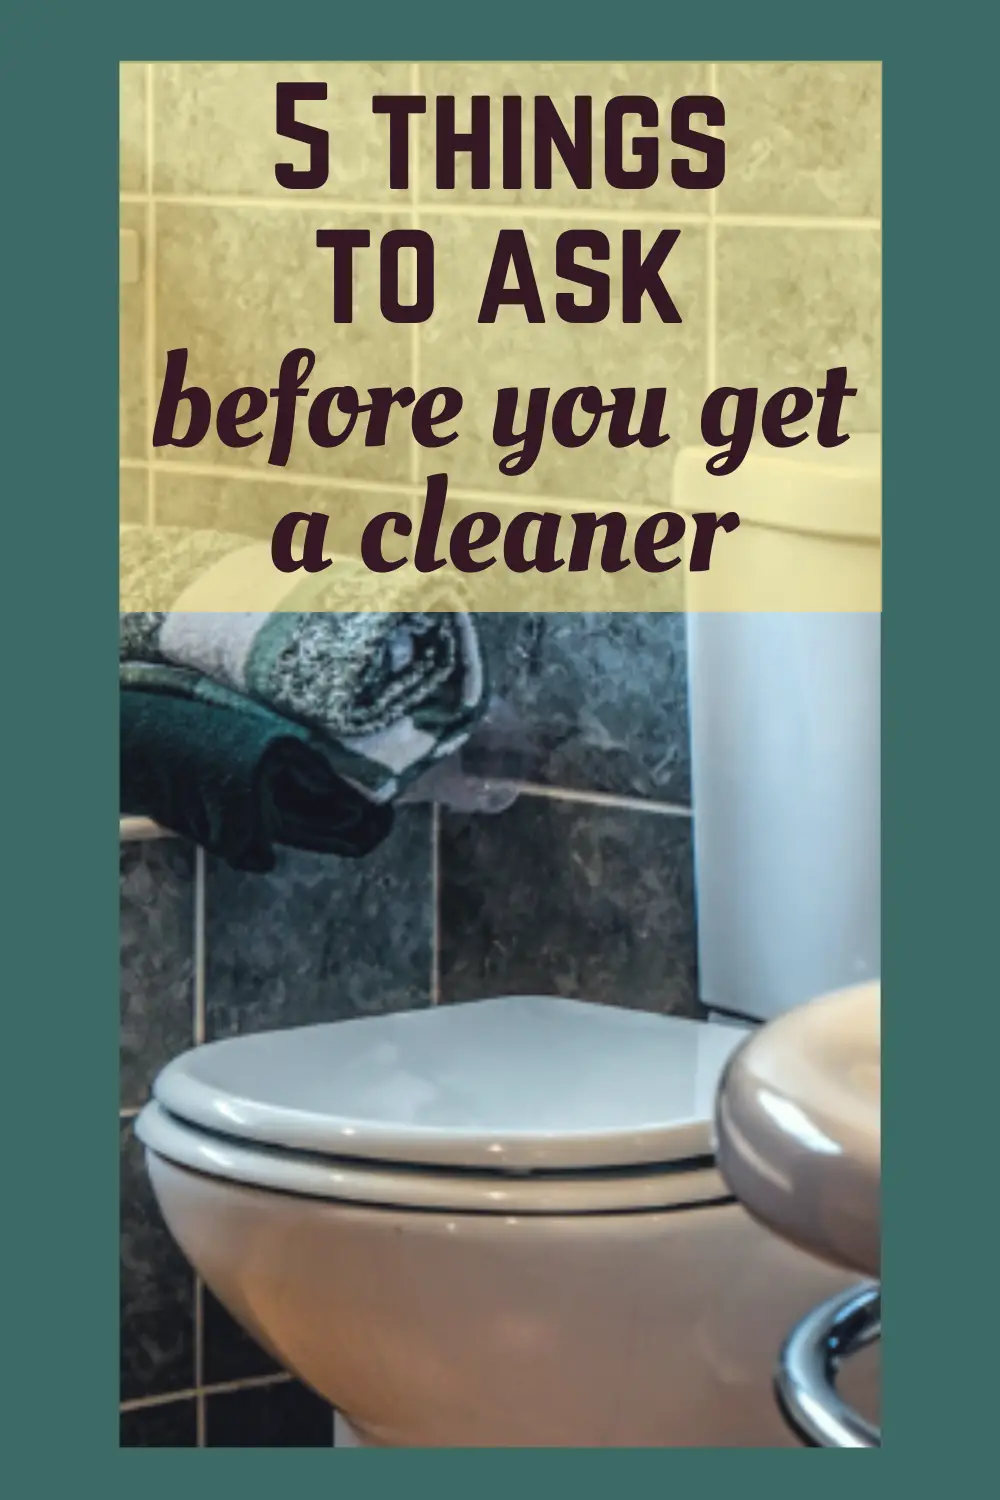 5 things to ask before you get a cleaner.